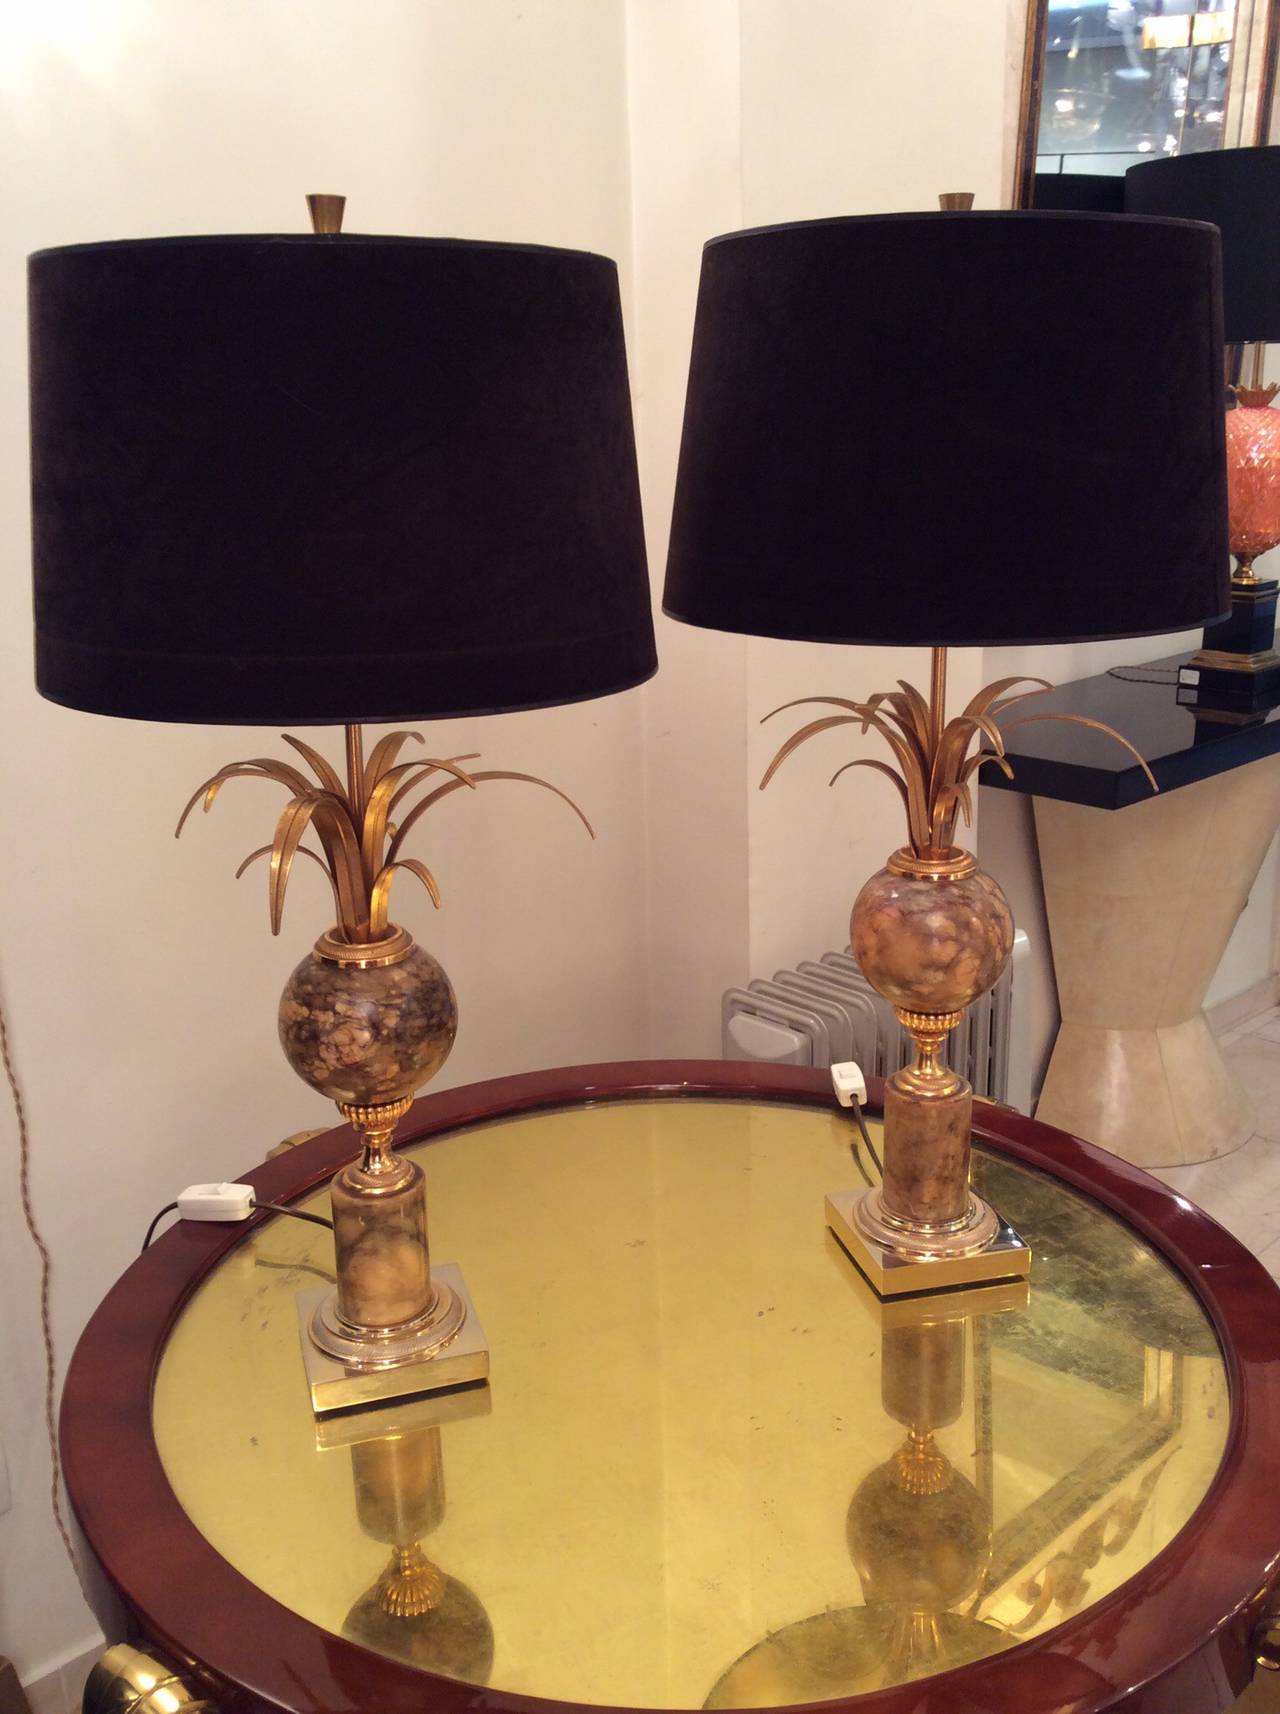 Pair of Maison Charles lamps,
Bronze and marble
Old suedine and gold  shades